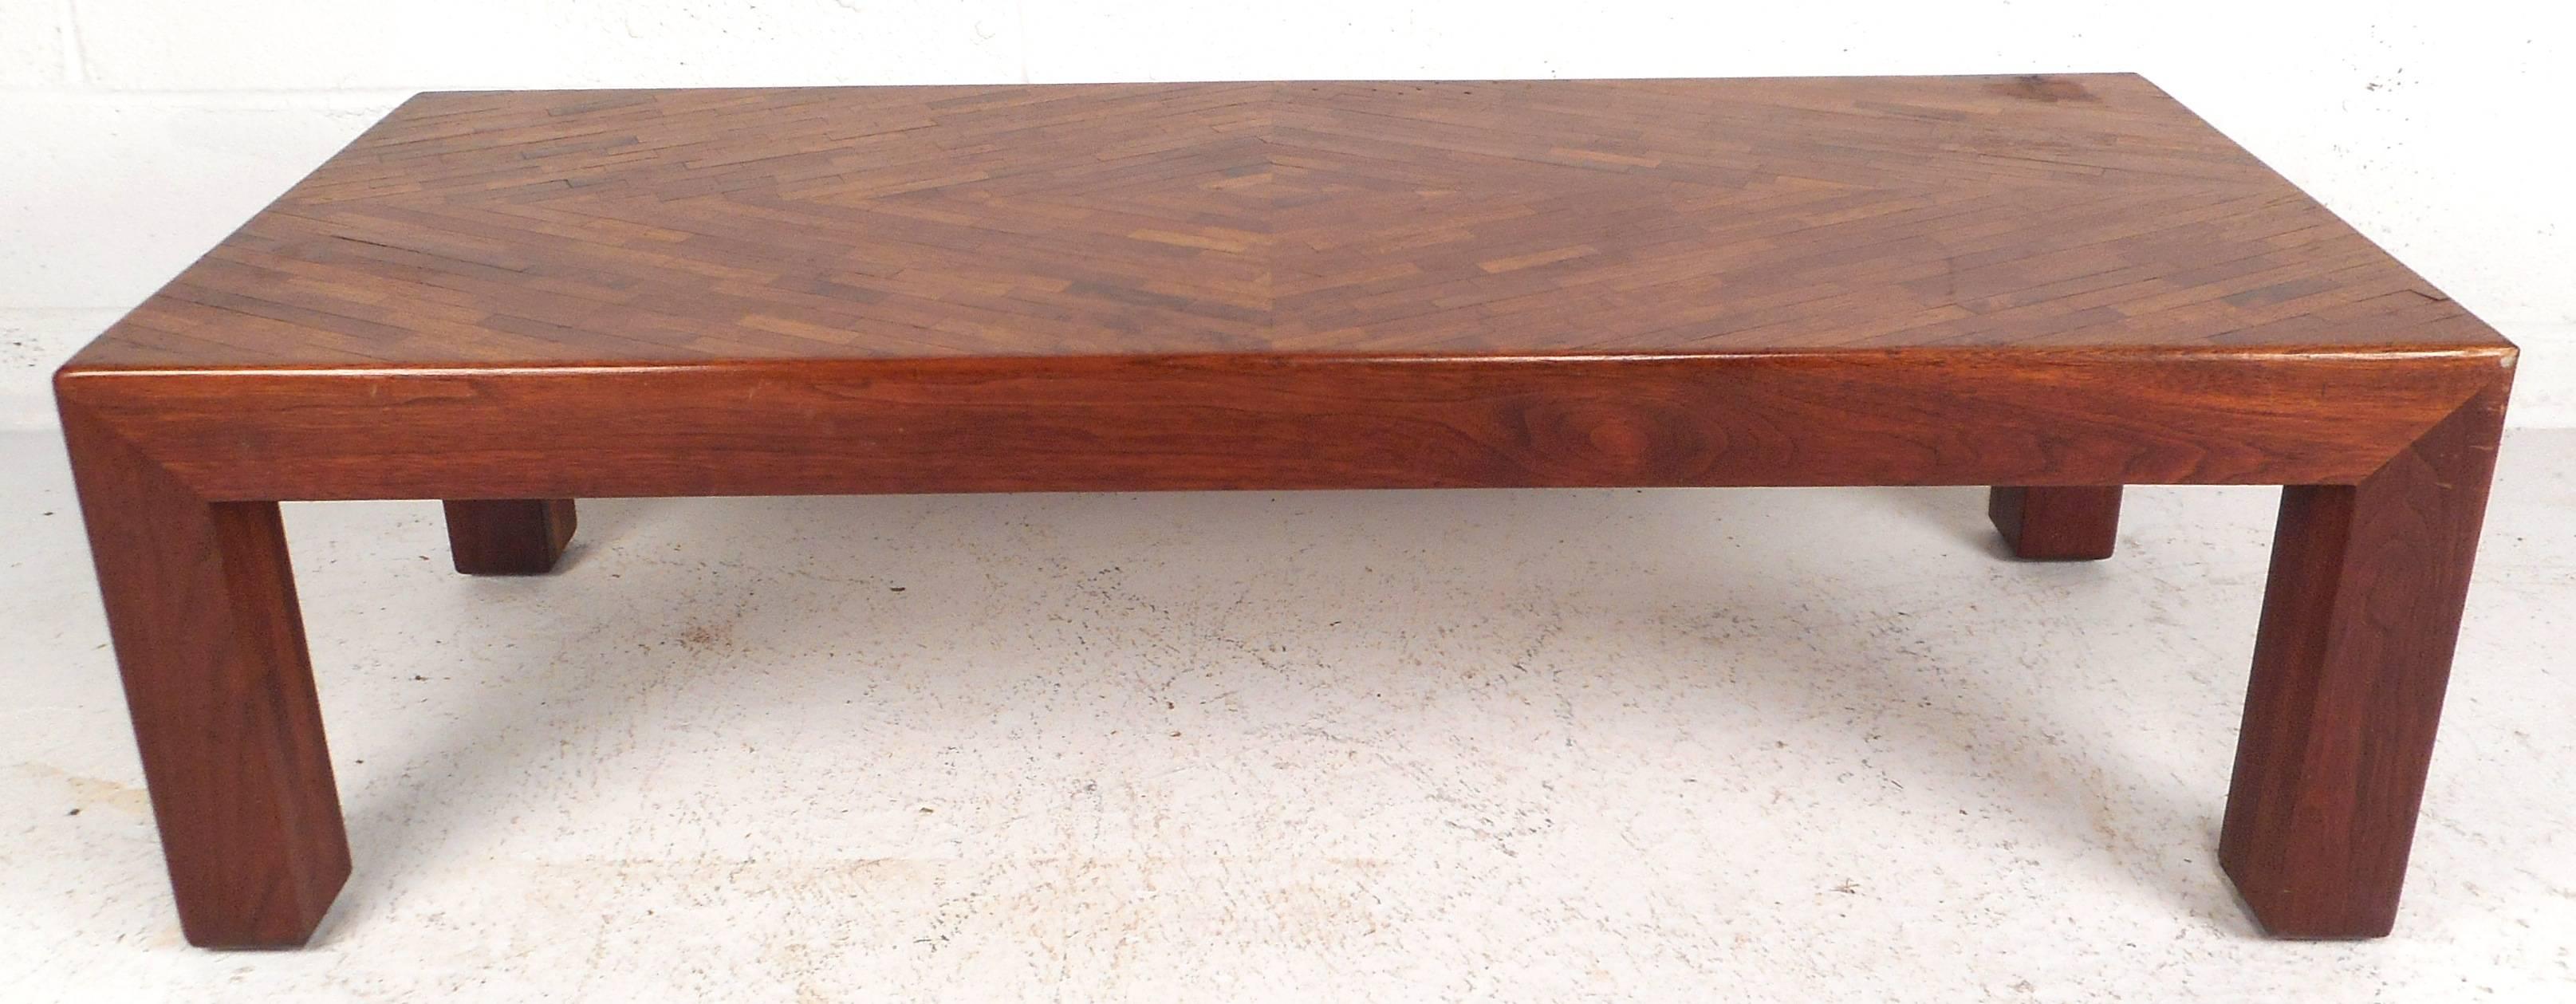 Impressive vintage modern coffee table features a unique patterned in lay design on top. Elegant walnut wood grain, sturdy construction, and clean line work make this Mid-Century piece the perfect addition to any modern interior. Please confirm item